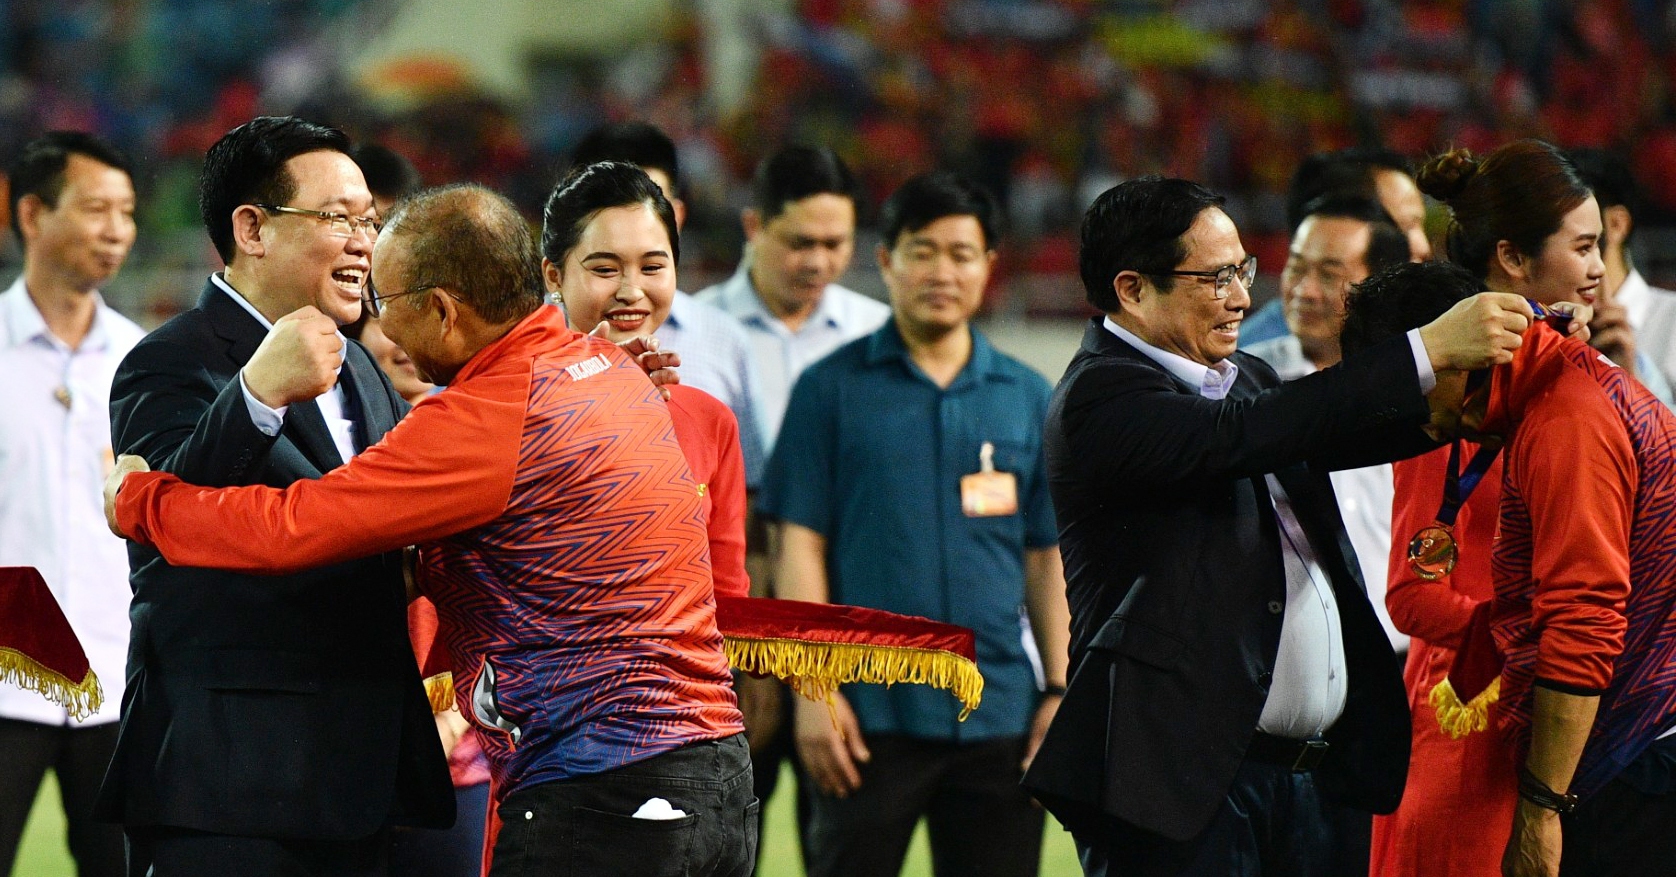 Leaders of the Party and State congratulate U23 Vietnam on winning the 31st SEA Games gold medal